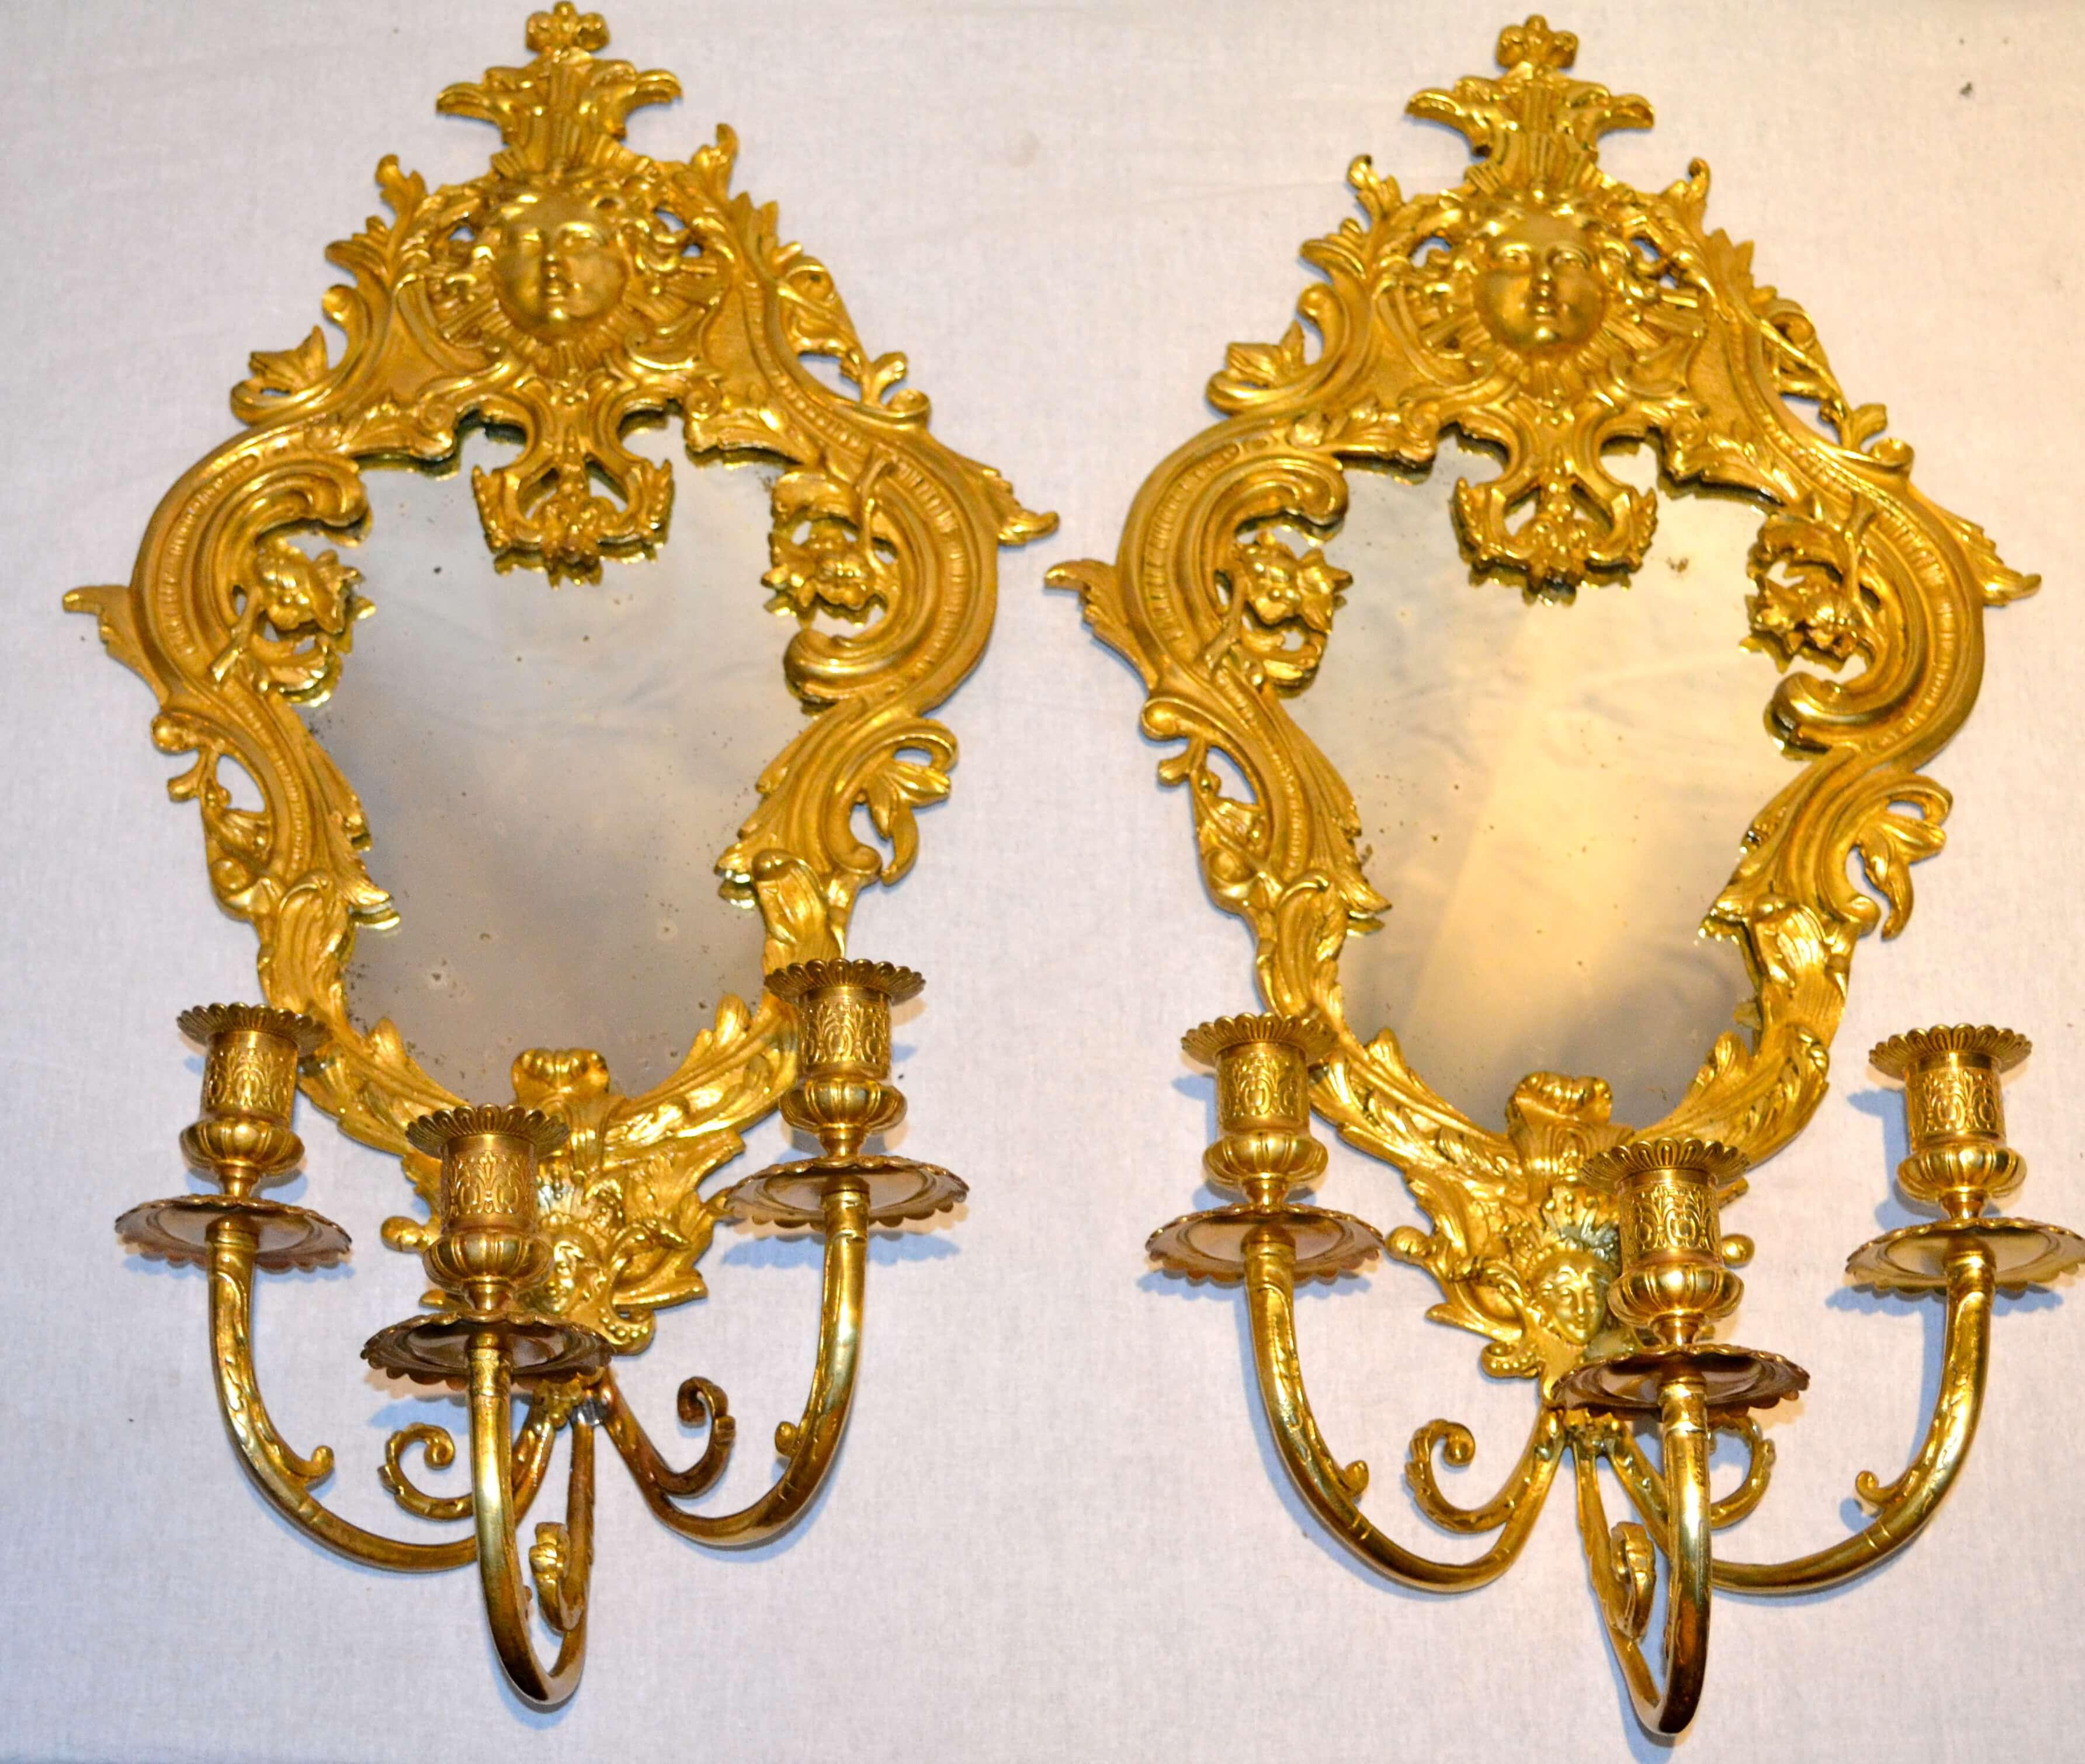 A pair of Louis XIV-style mirrored brass sconces with three candle holders, the mirror framed in scrolling rococo foliate trim with classical masks at the bottom and top of each sconce. Unwired.